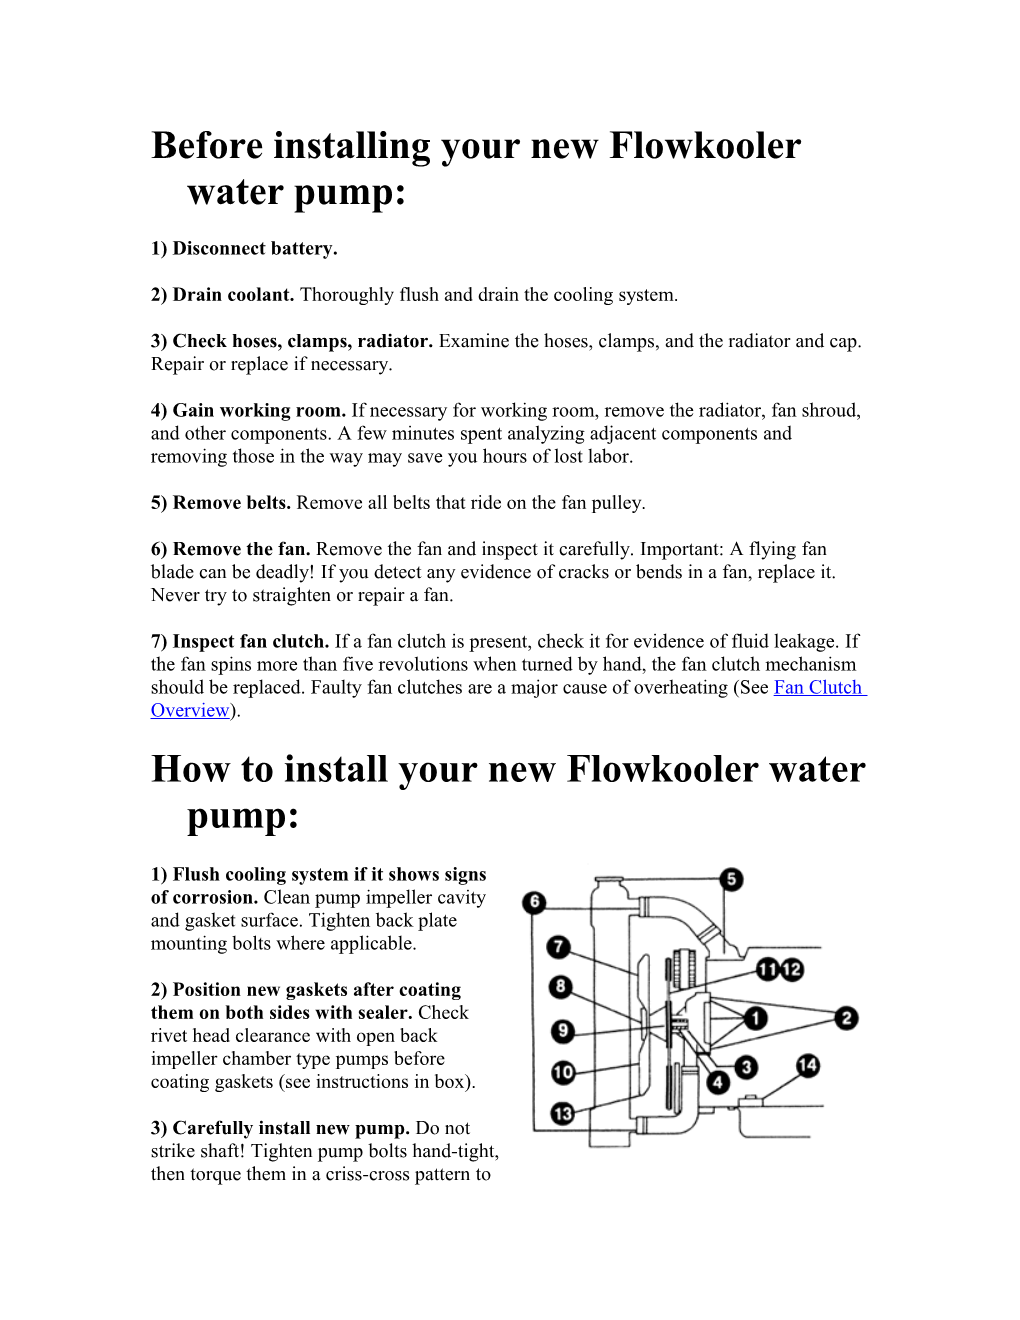 Before Installing Your New Flowkooler Water Pump: